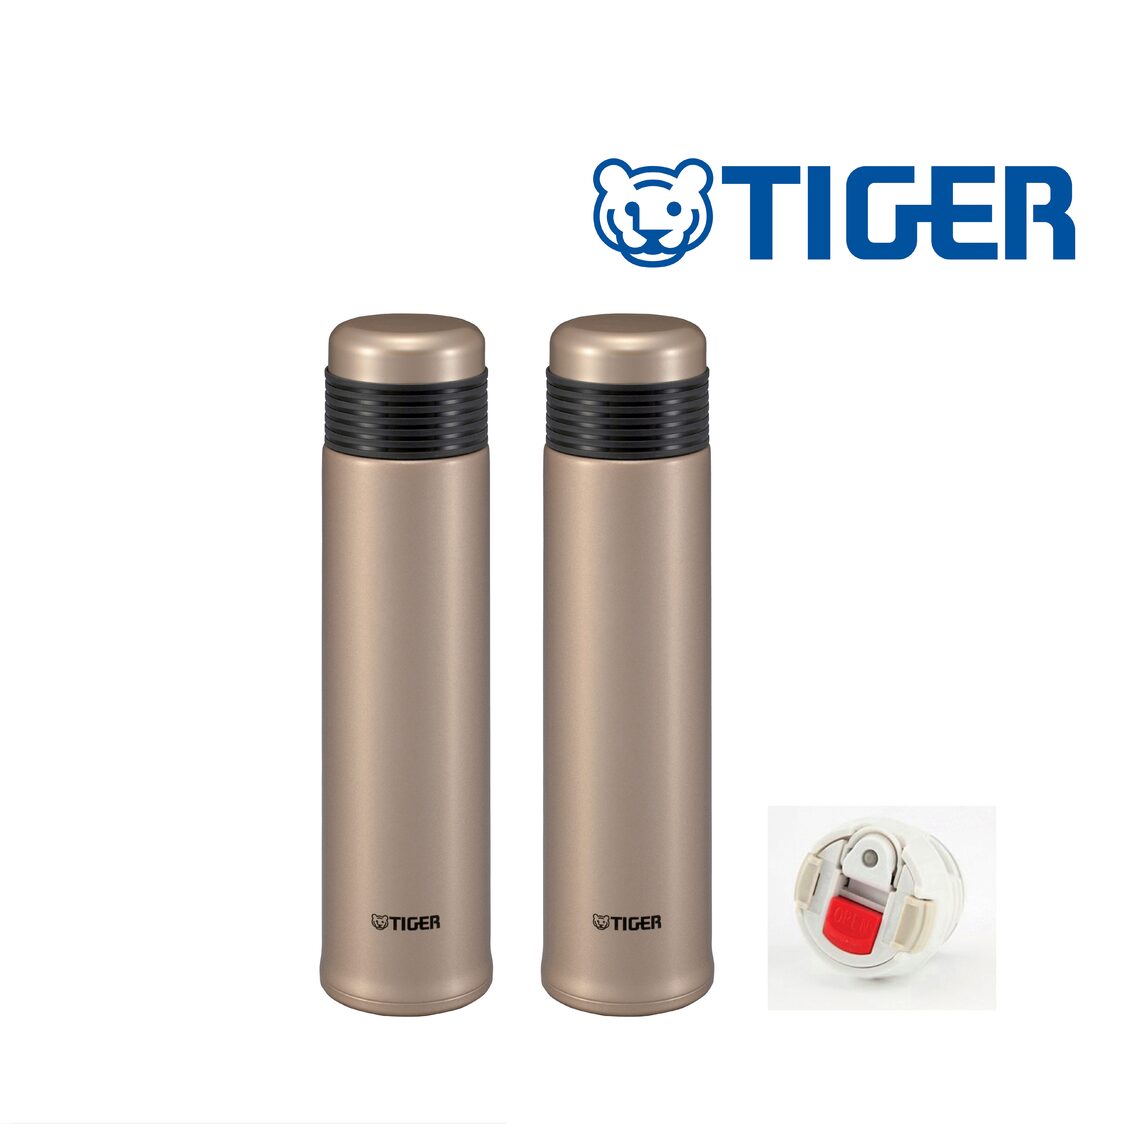 Tiger Double Stainless Steel Bottle 500ml 2pc Bundle Set